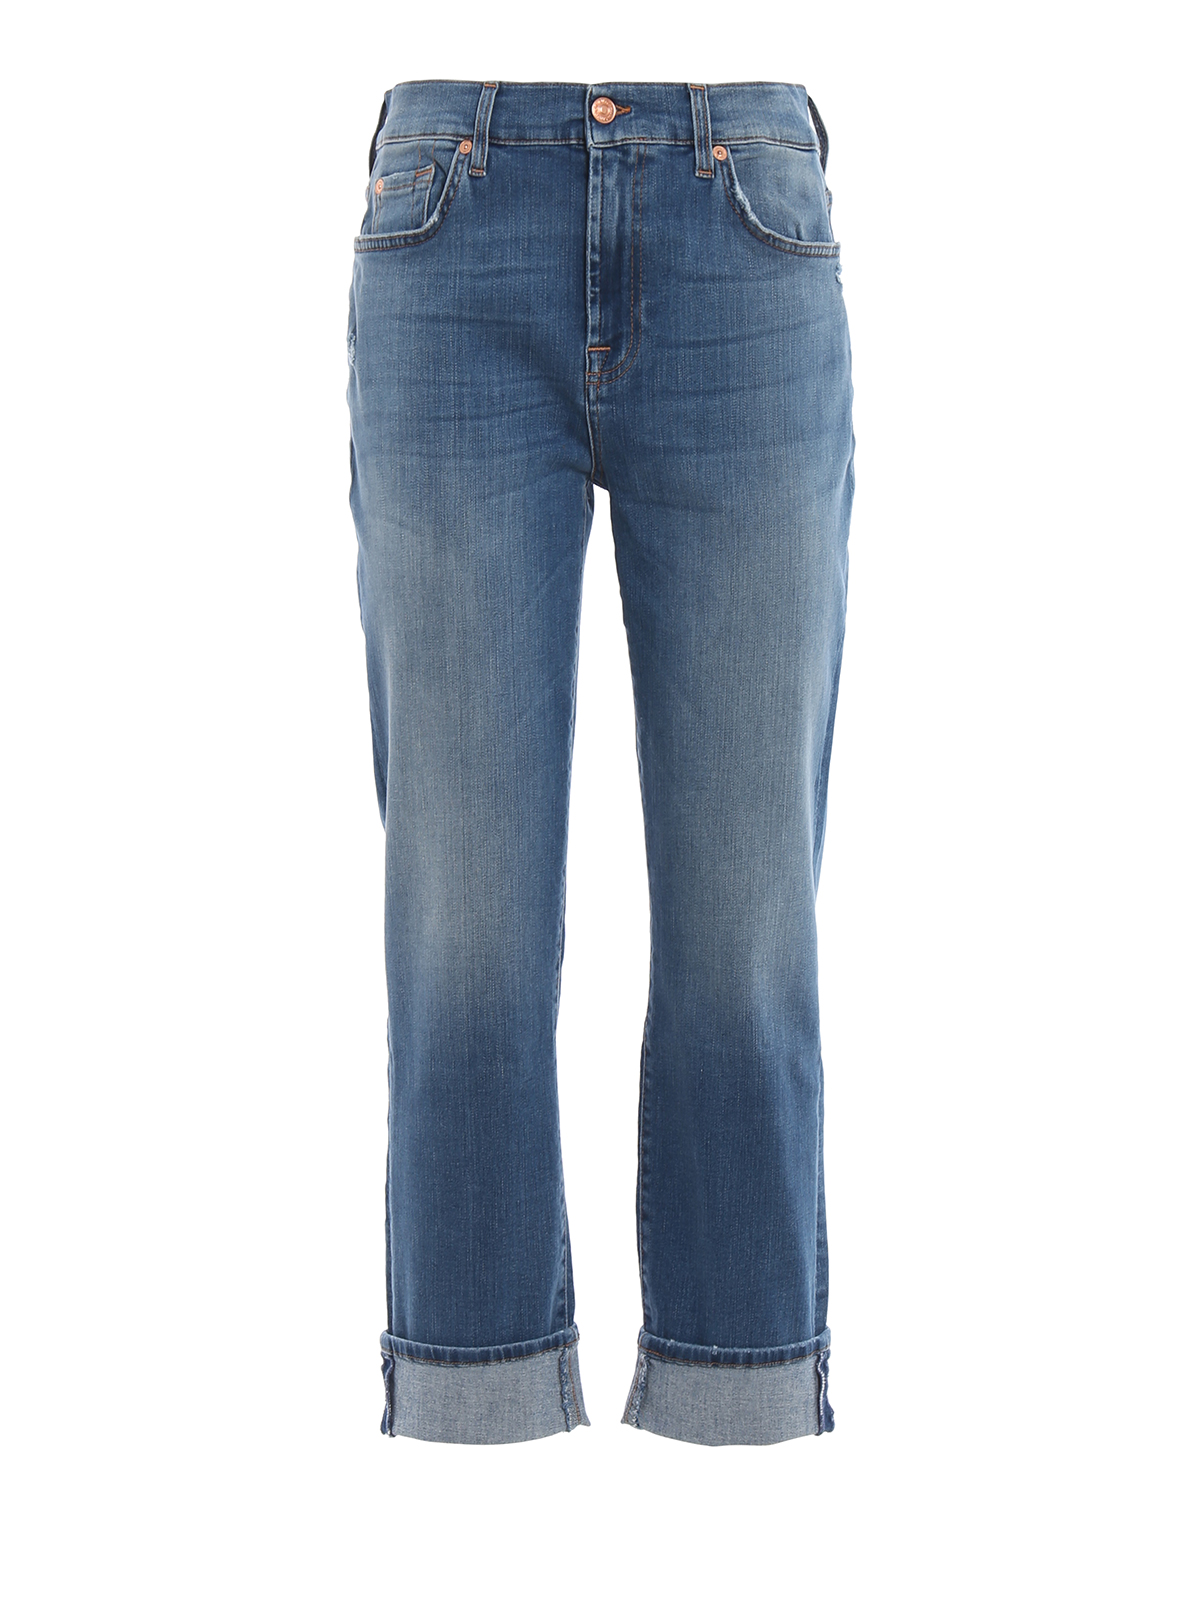 Women's 7 for all mankind Jeans Girlfriend Relaxed skinny NEW $189 